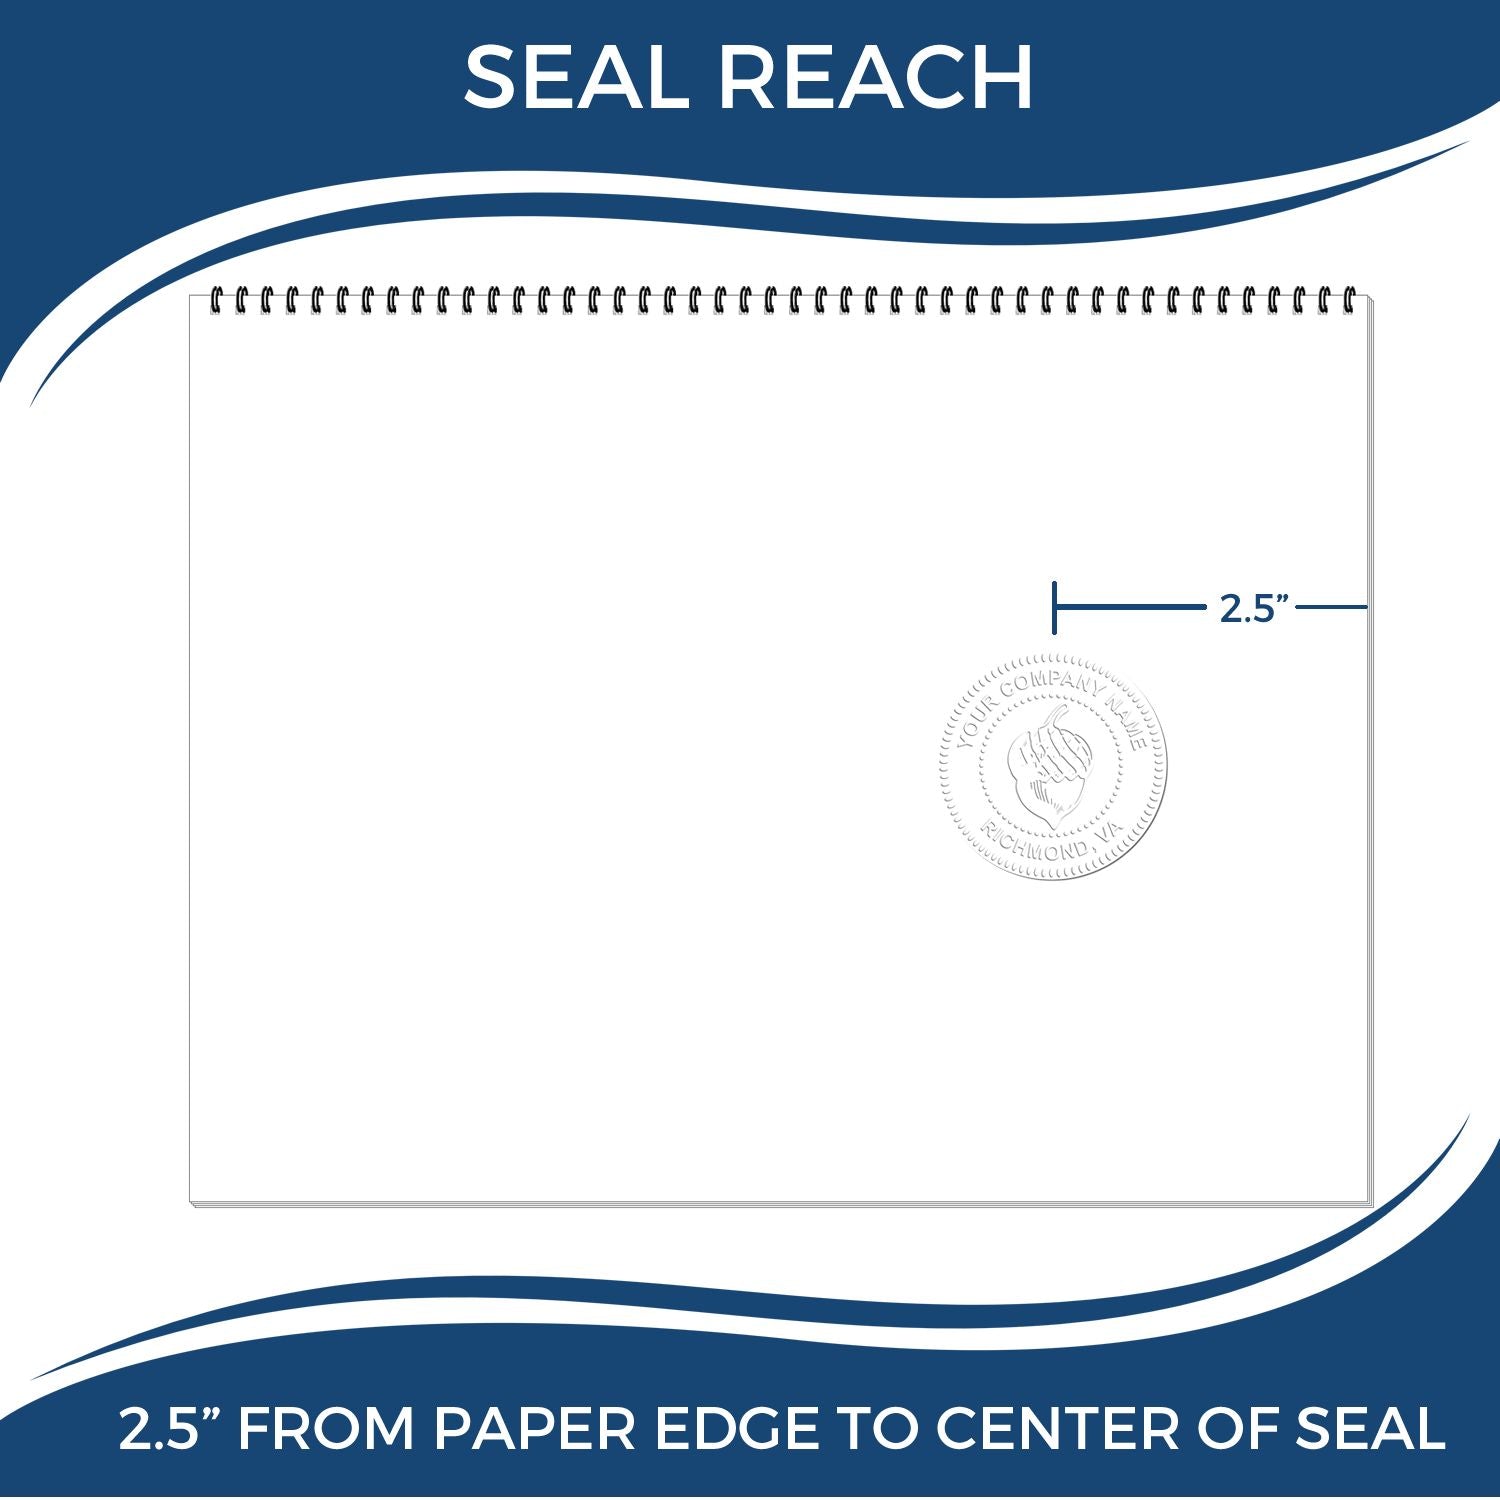 An infographic showing the seal reach which is represented by a ruler and a miniature seal image of the Heavy Duty Cast Iron Alabama Engineer Seal Embosser